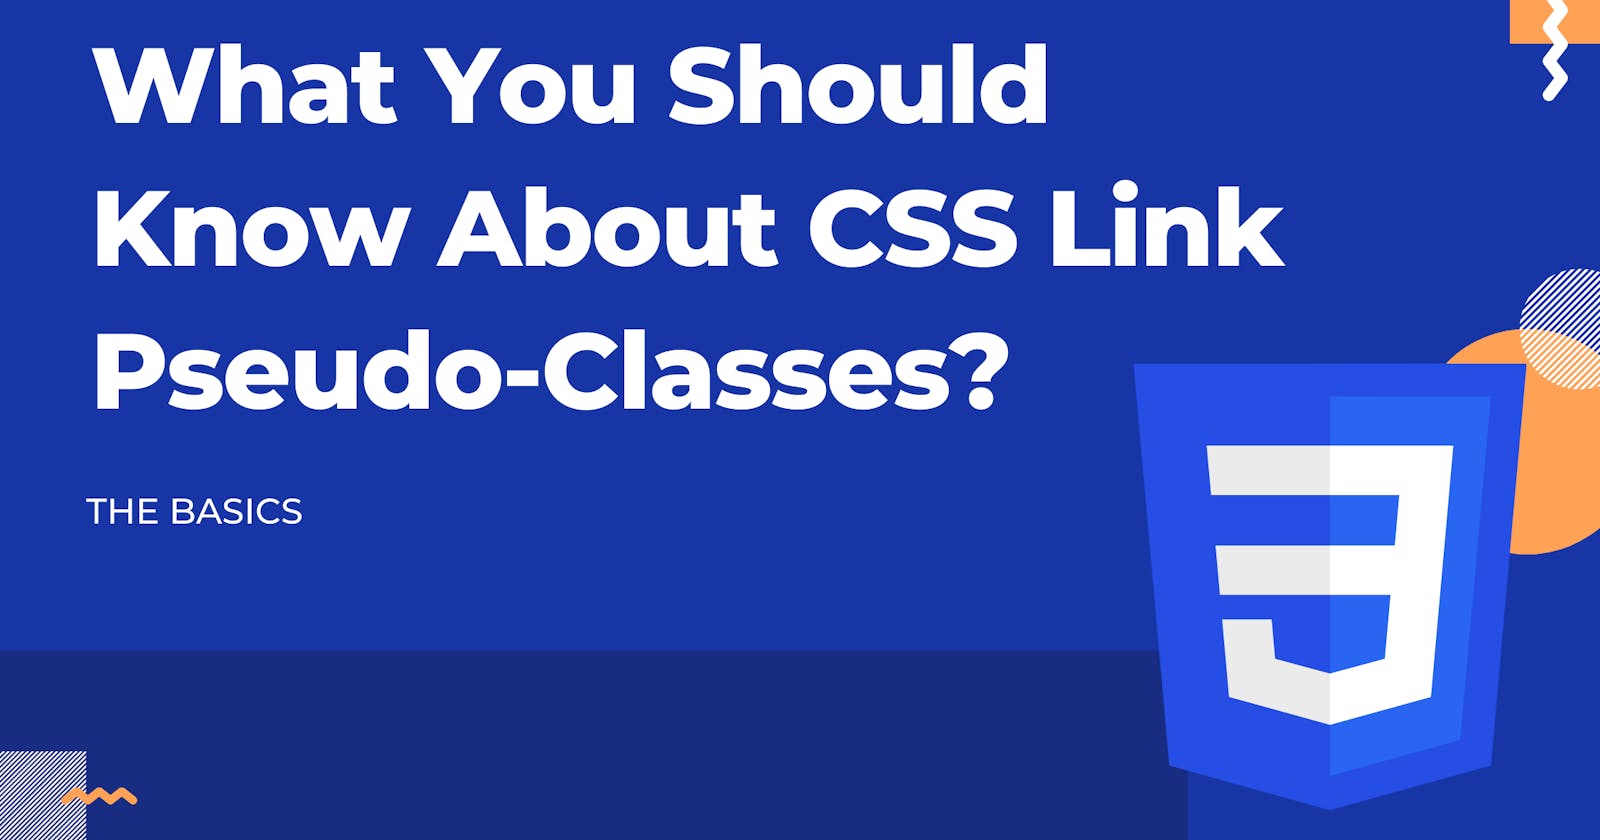 What You Should Know About CSS Link Pseudo-classes?